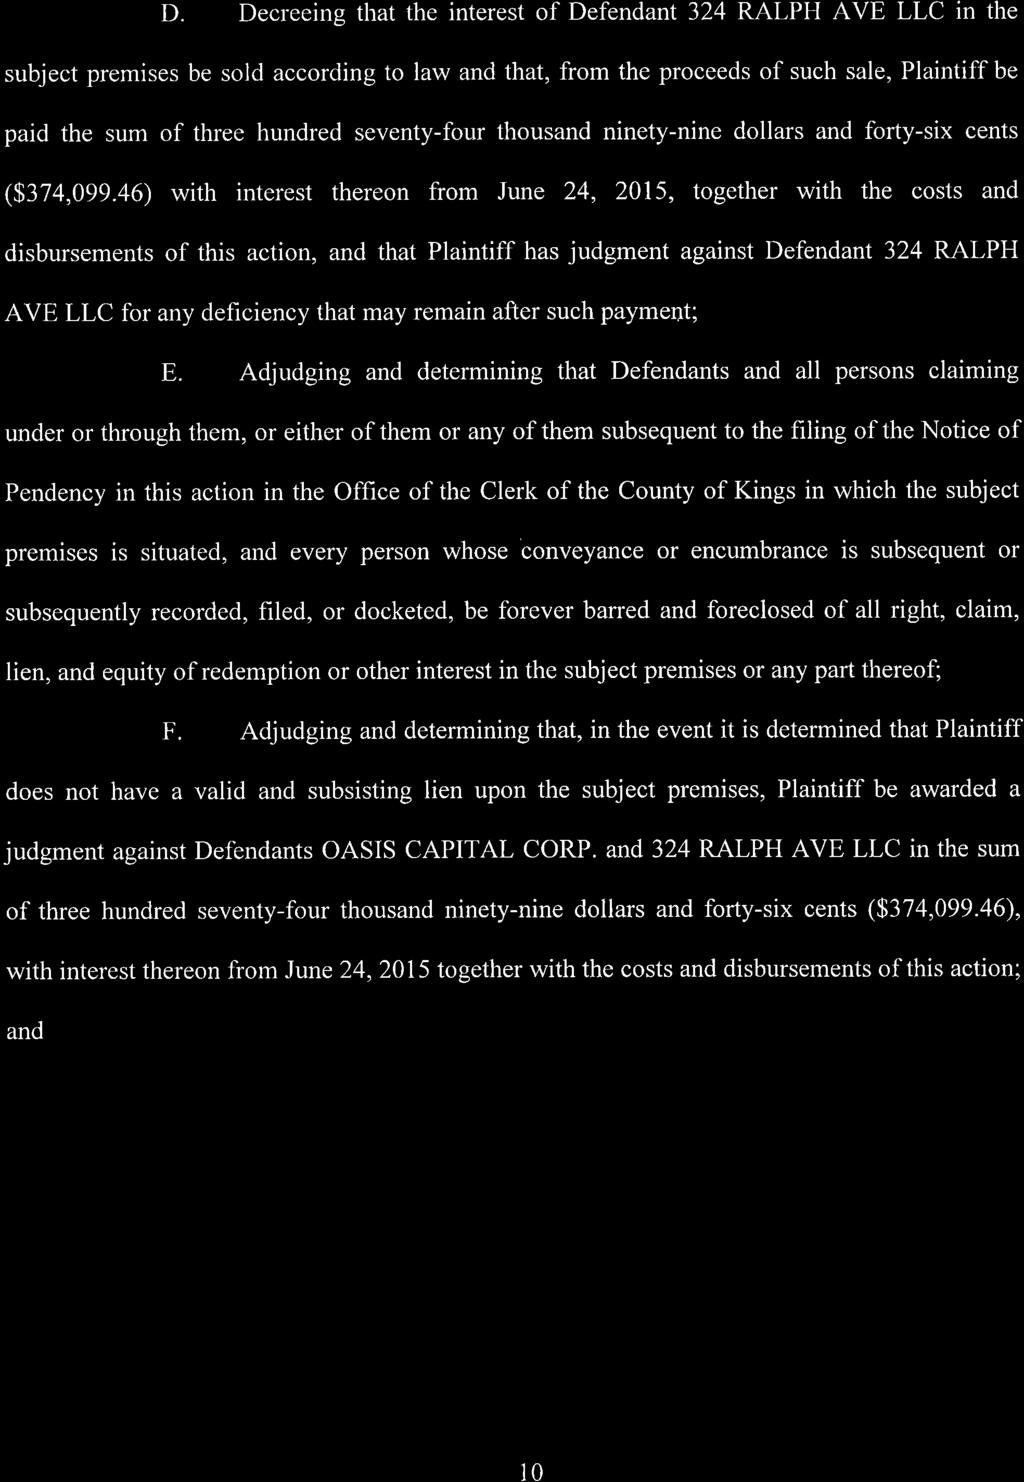 D. Decreeing that the interest of Defendant 324 RALPH AVE LLC in the subject premises be sold according to law and that, from the proceeds of such sale, Plaintiff be paid the sum of three hundred